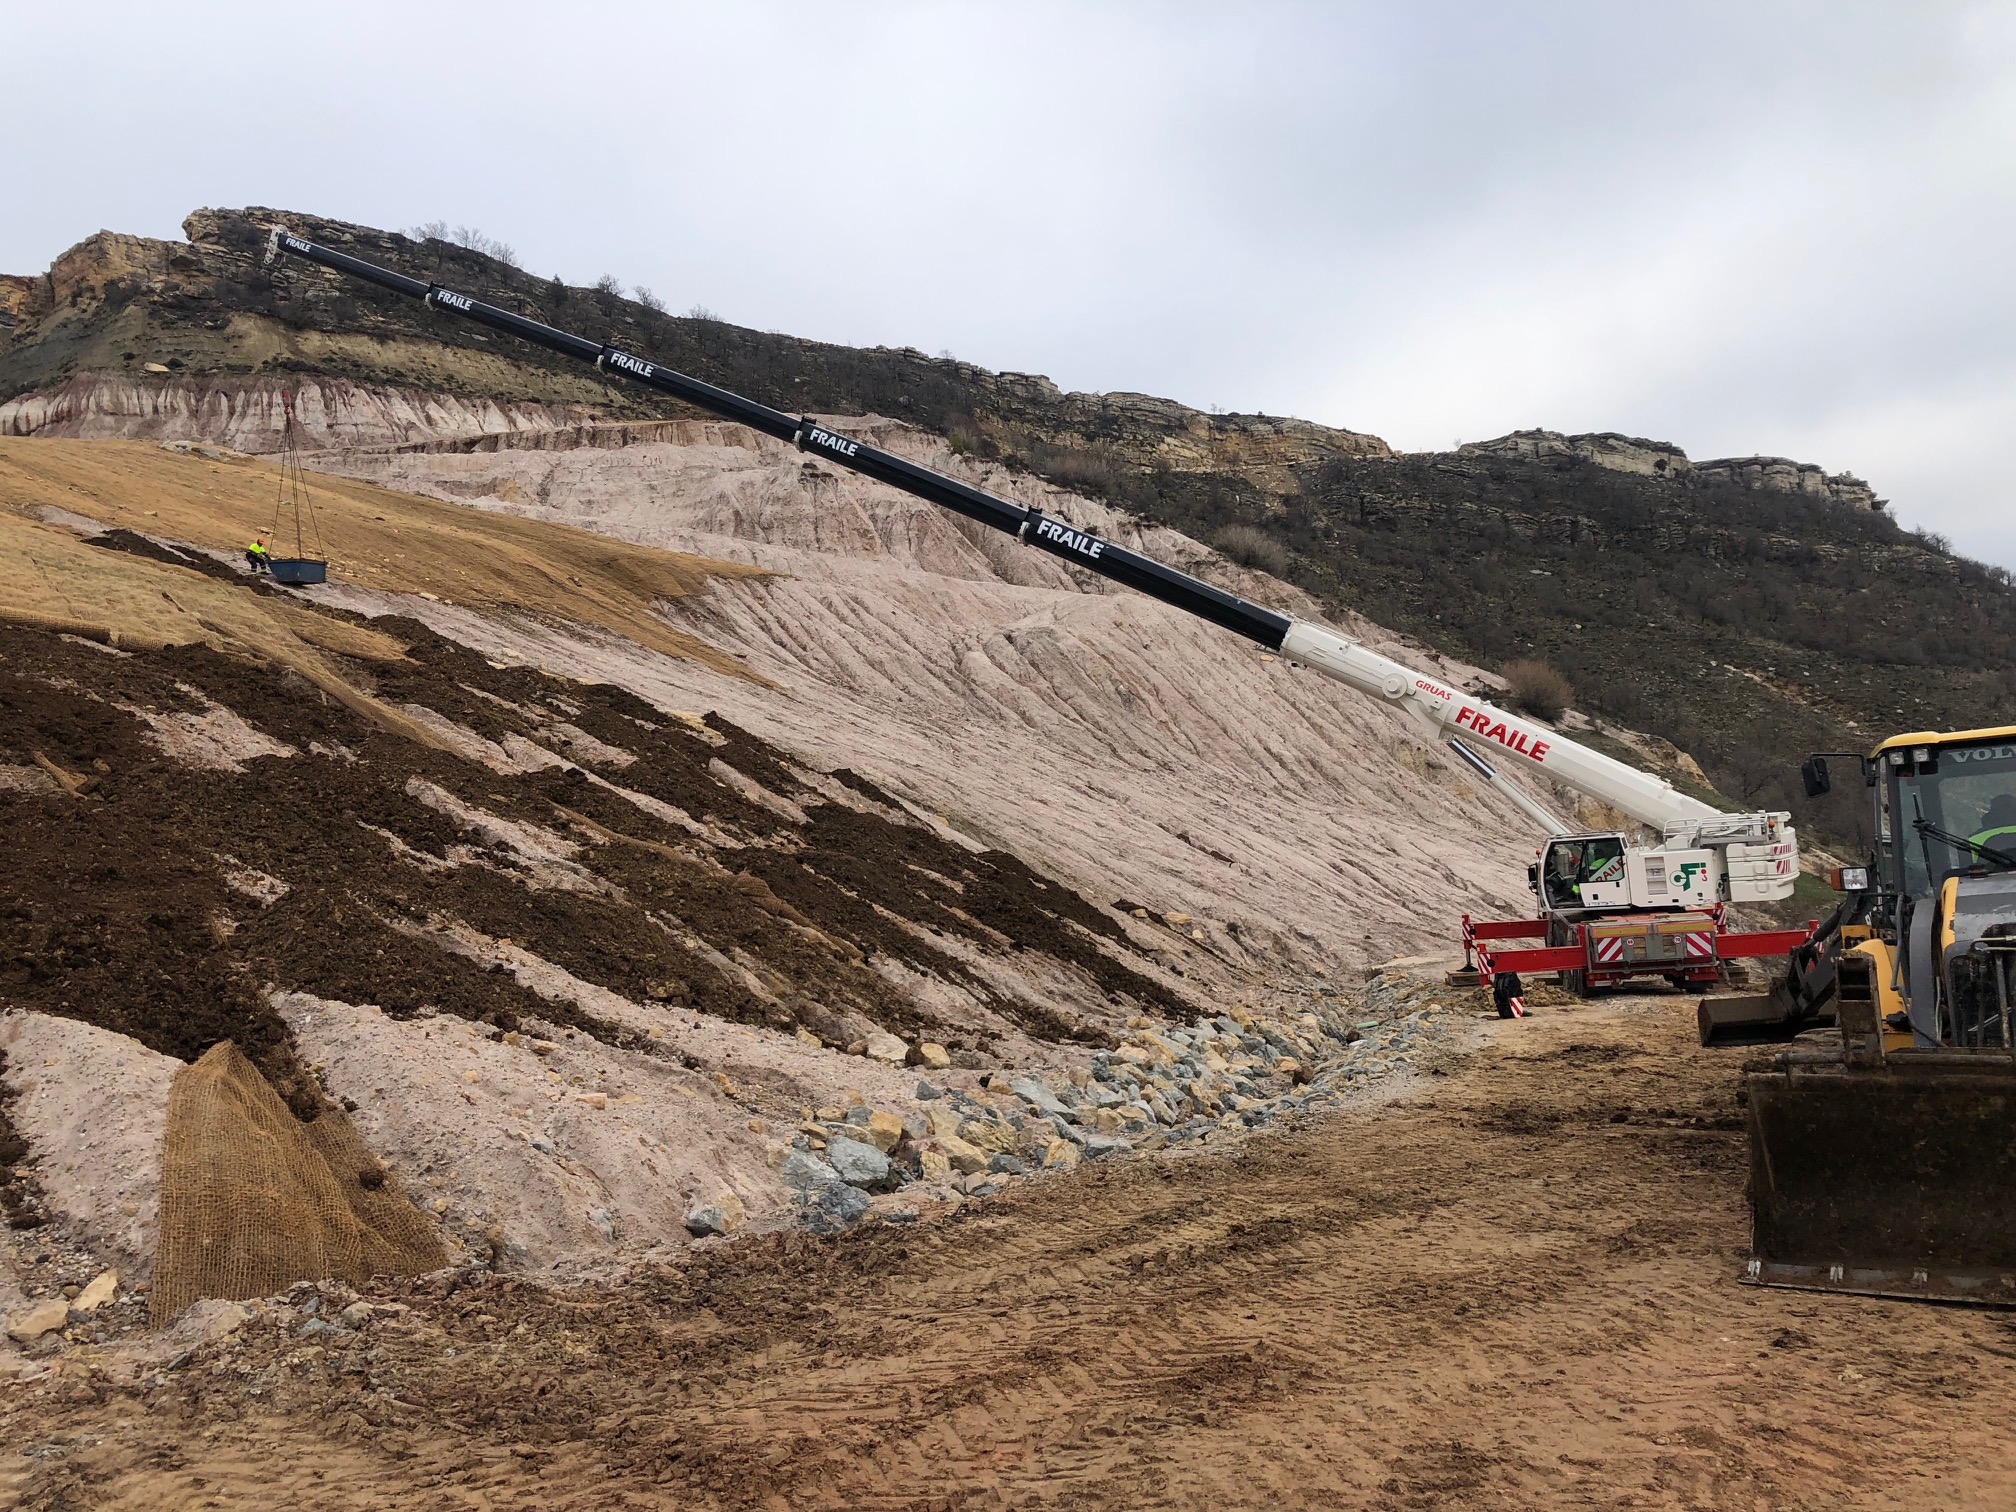 The restoration works in Peñalén do not stop! Progress in the construction of the Talud Royal and the restitution of soils